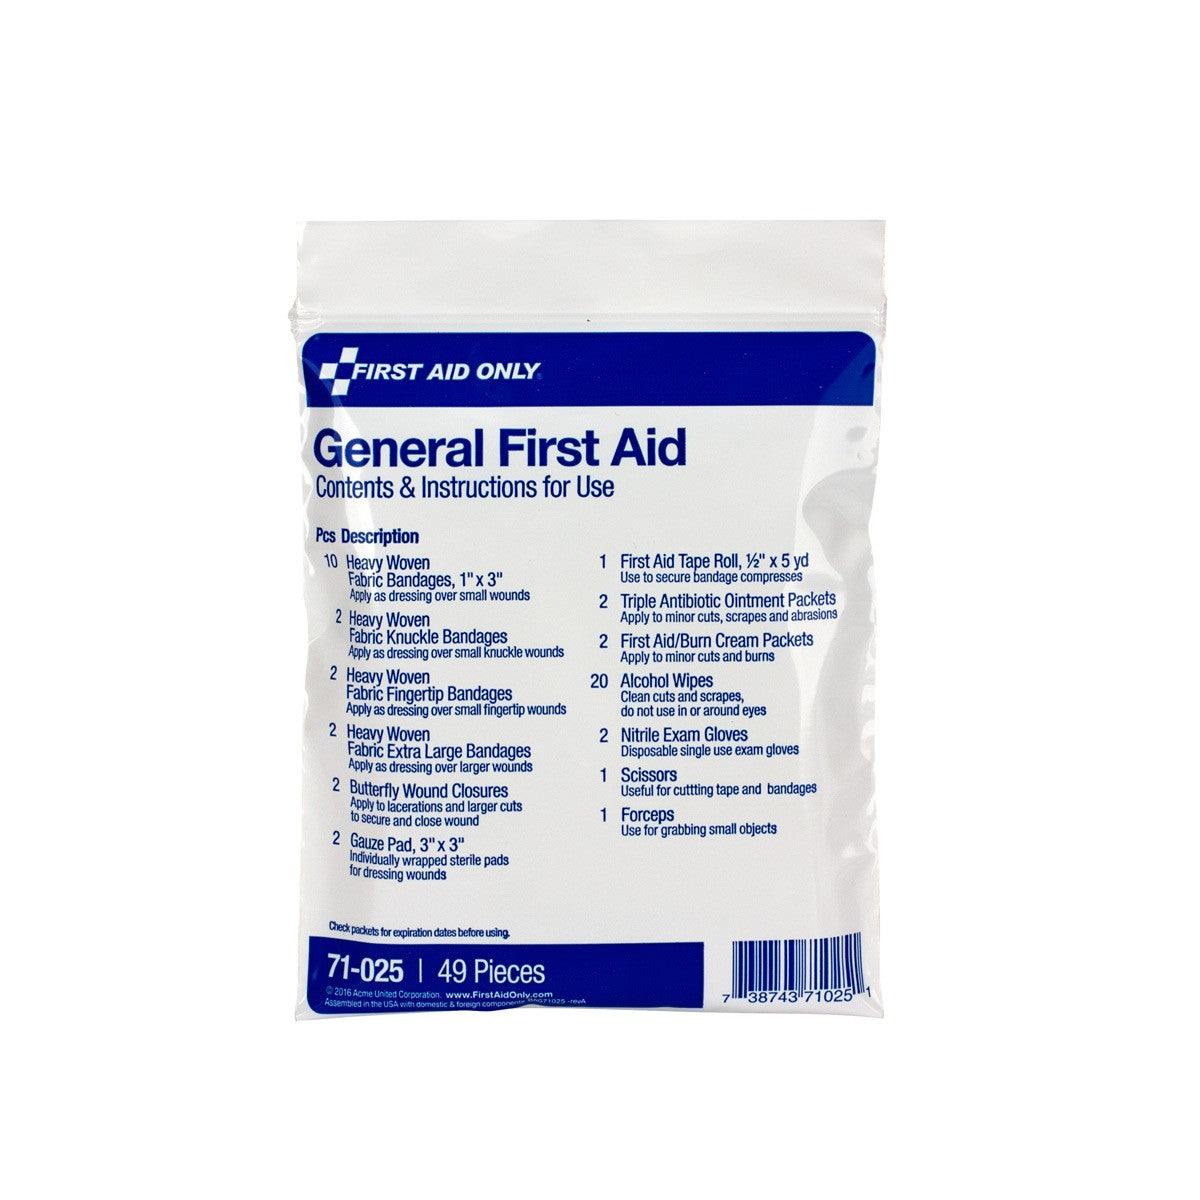 First Aid Triage Pack - General First Aid (Without Meds) - W-71-025